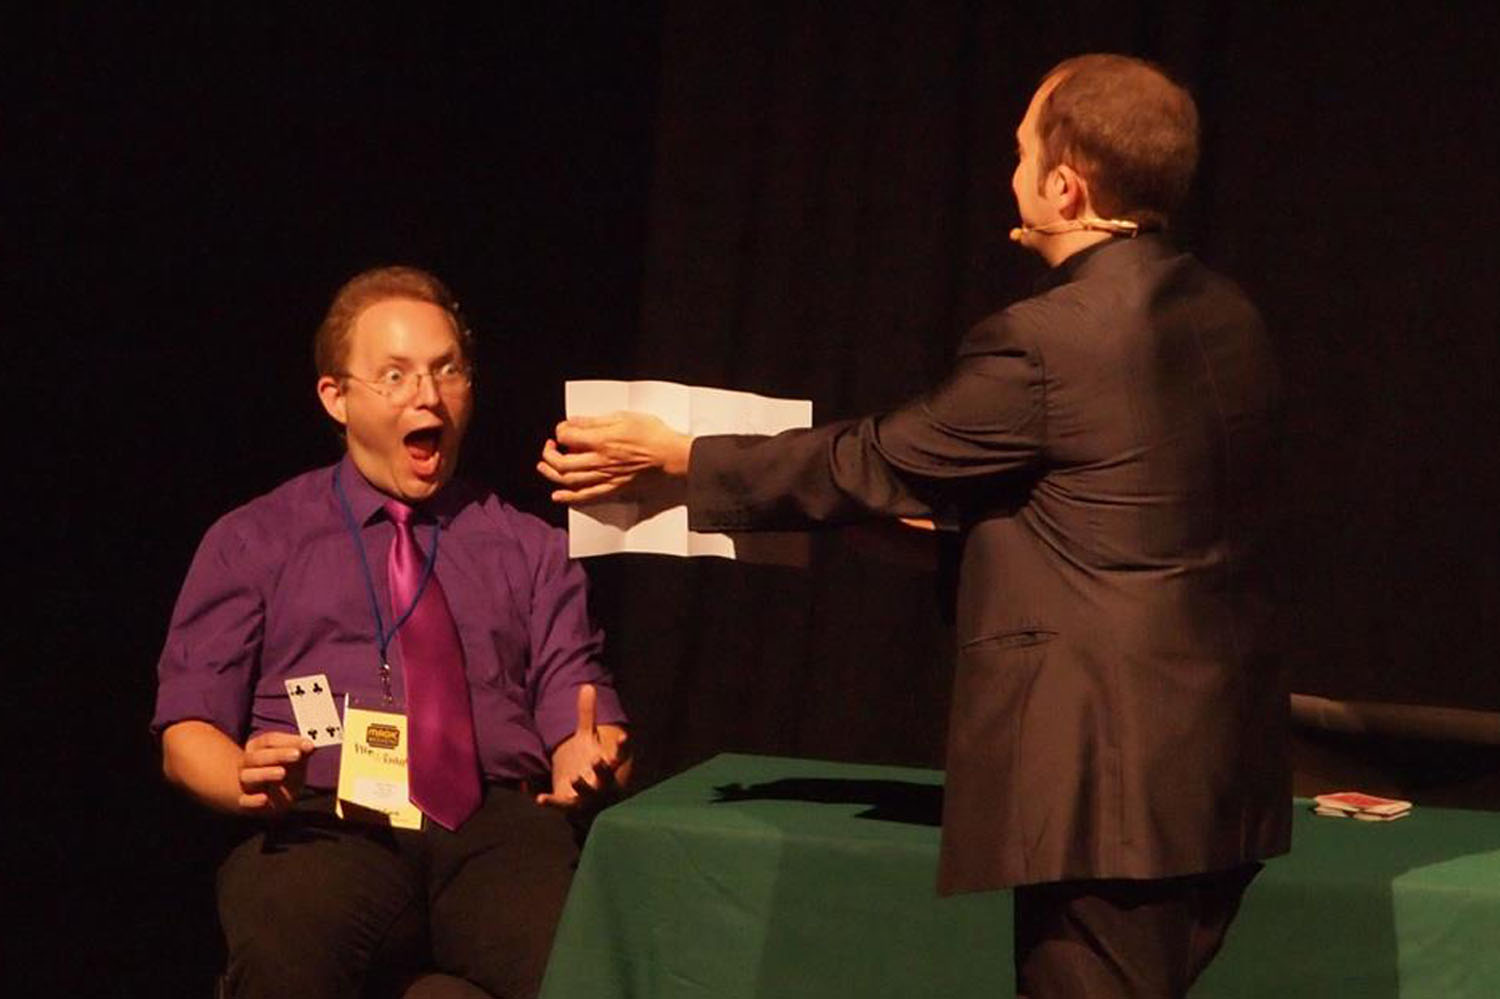 The French magician Boris Wild on stage performing his mentalism act